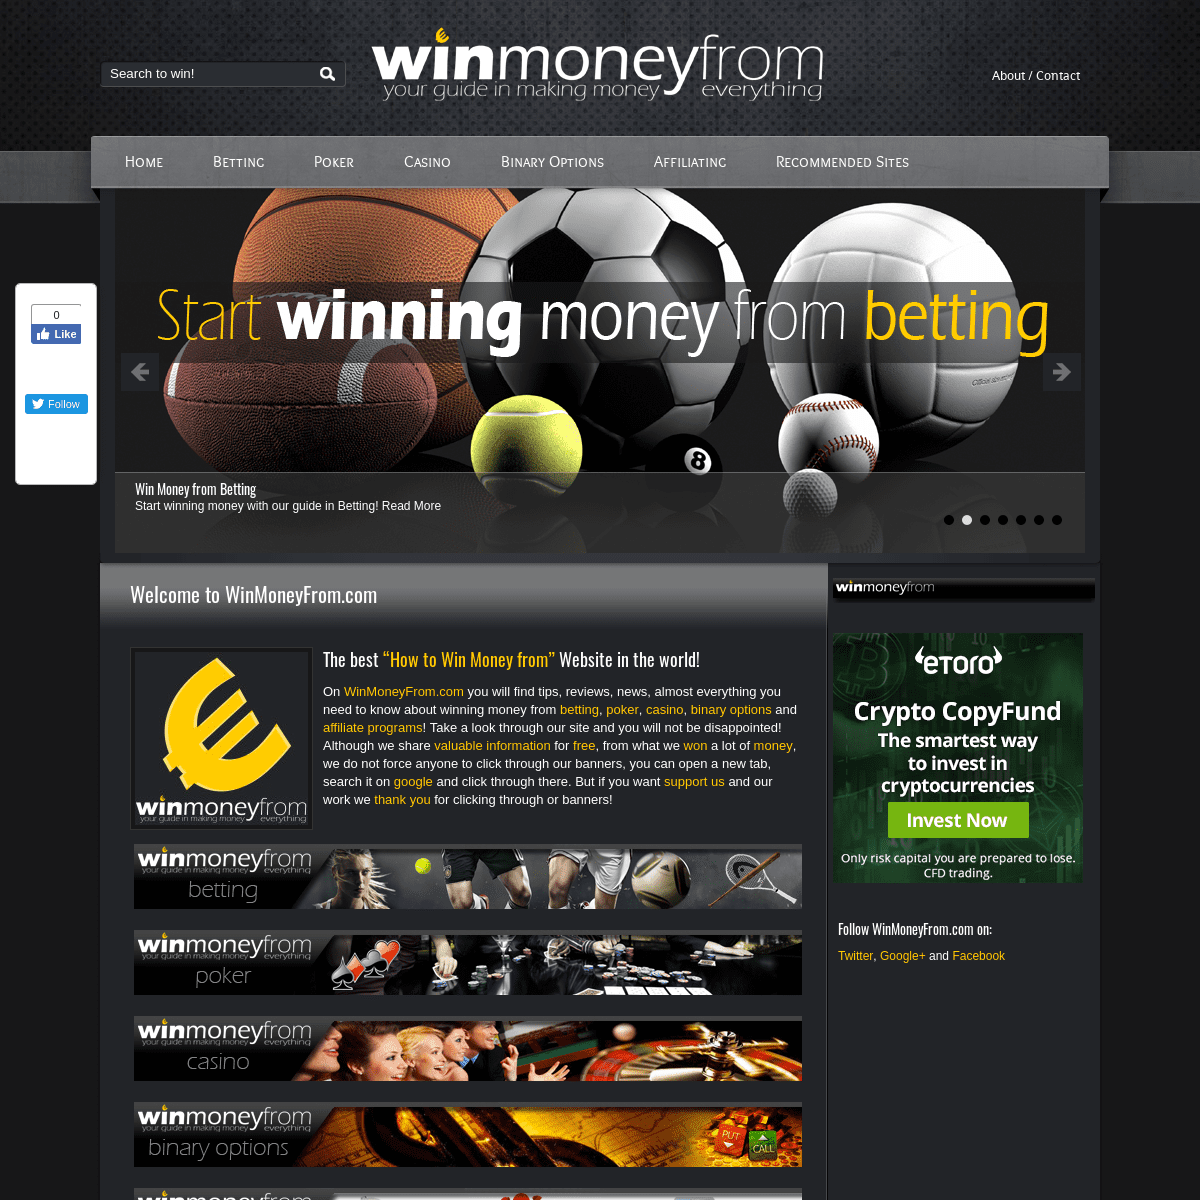 A complete backup of winmoneyfrom.com